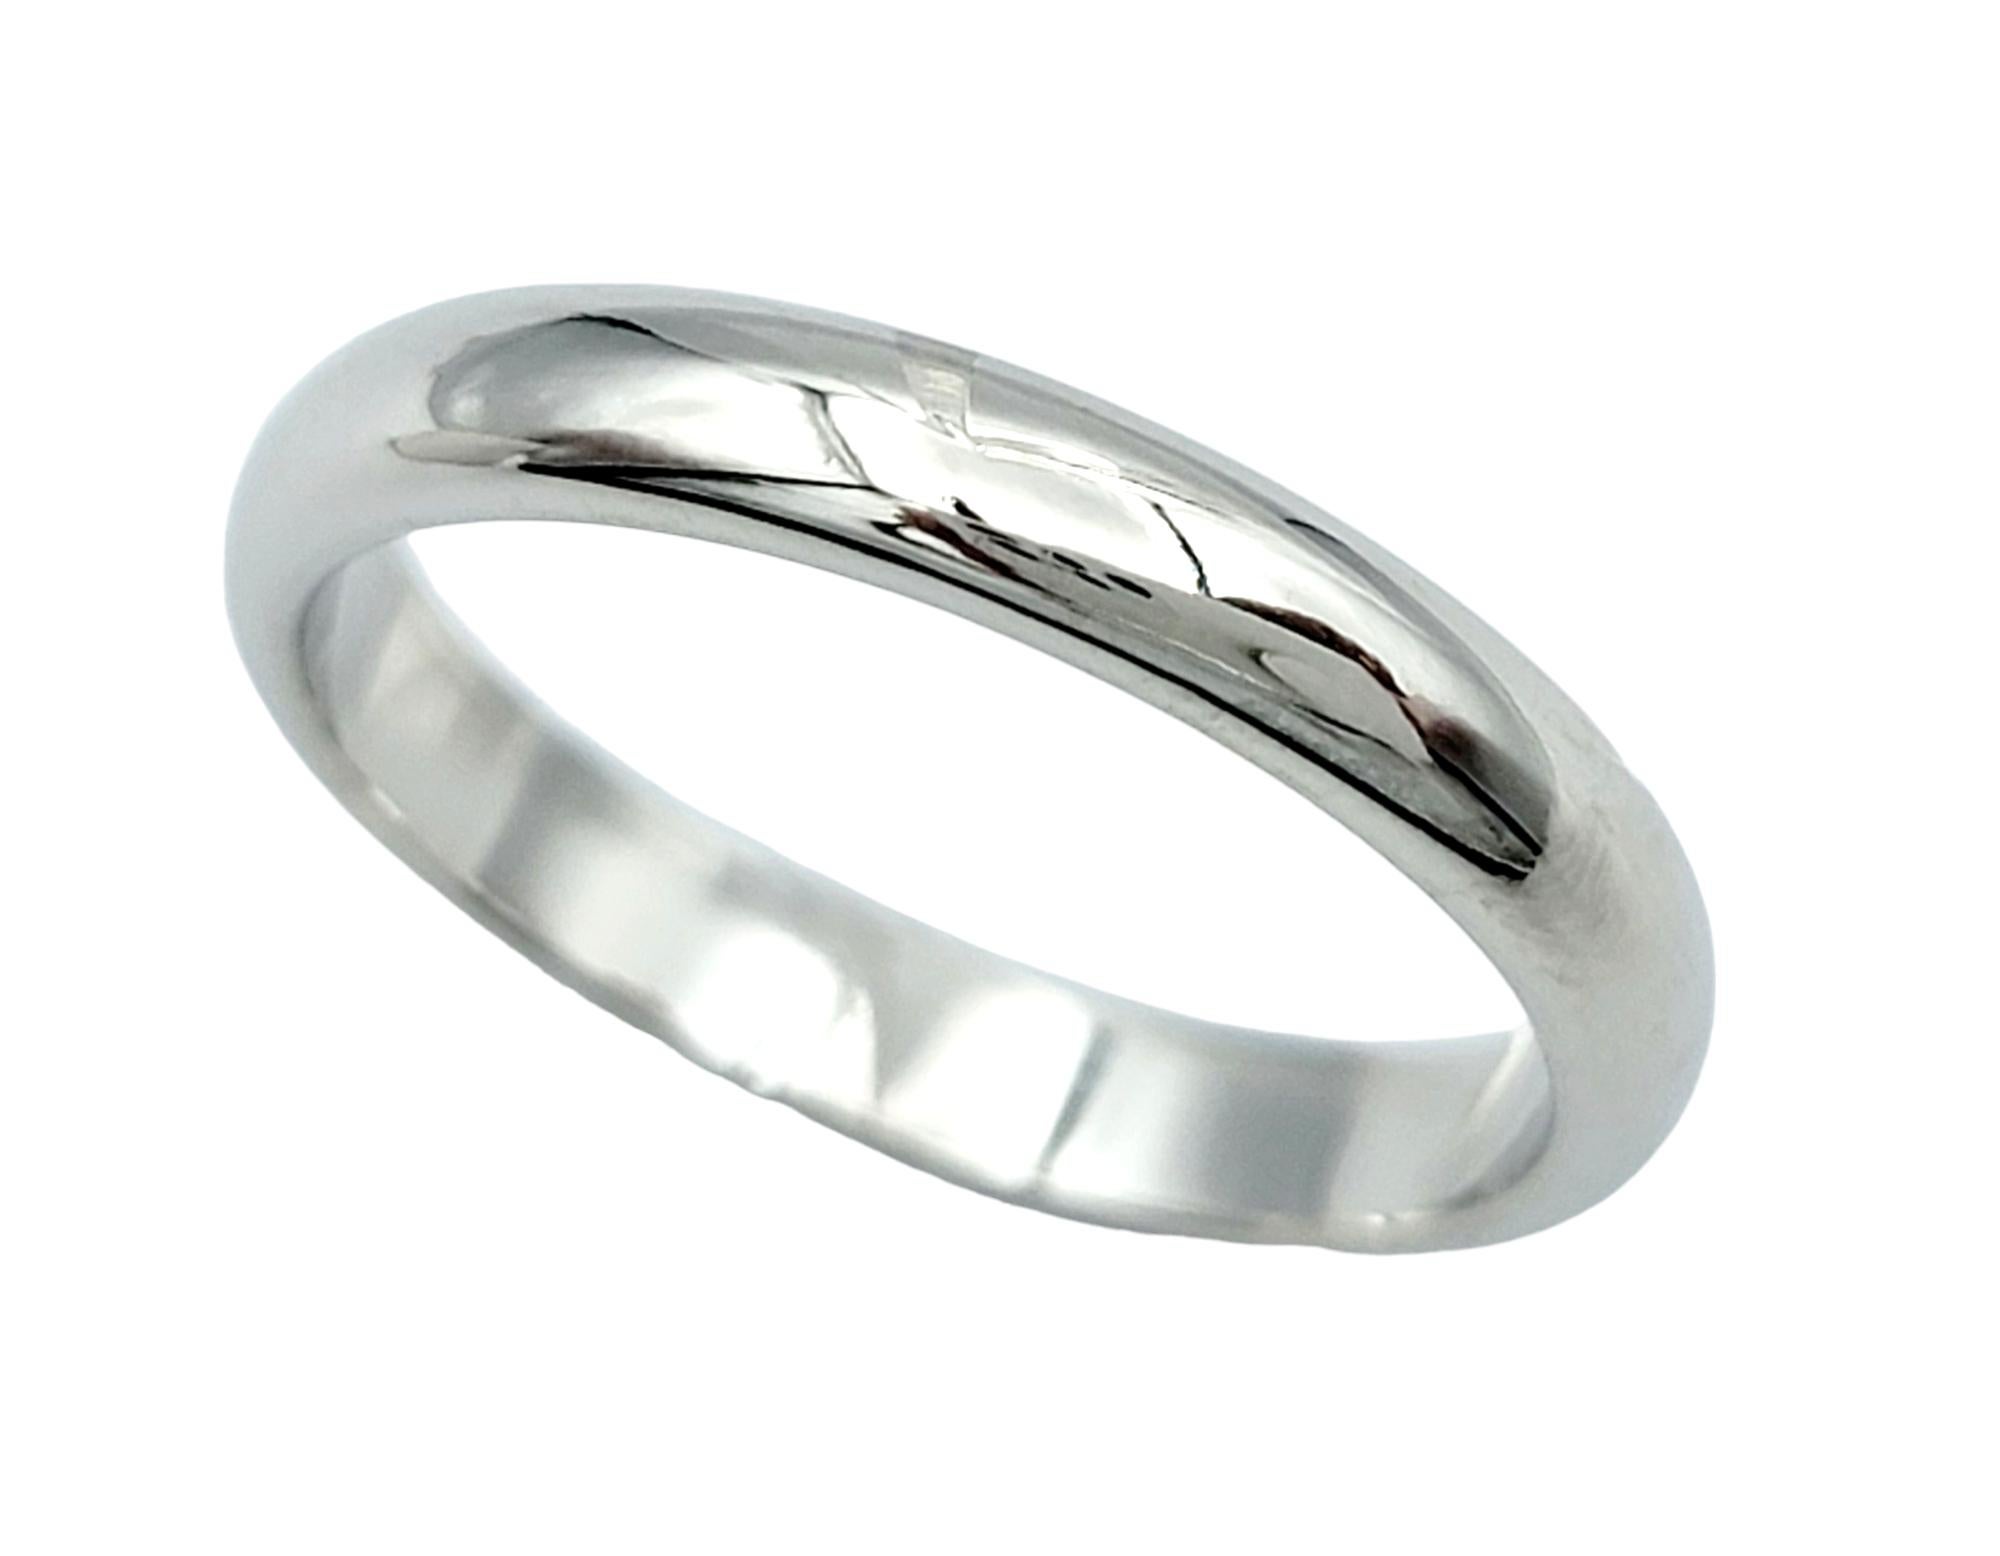 Tiffany & Co. Tiffany Forever Wedding Band Ring Set in Polished Platinum In Good Condition For Sale In Scottsdale, AZ